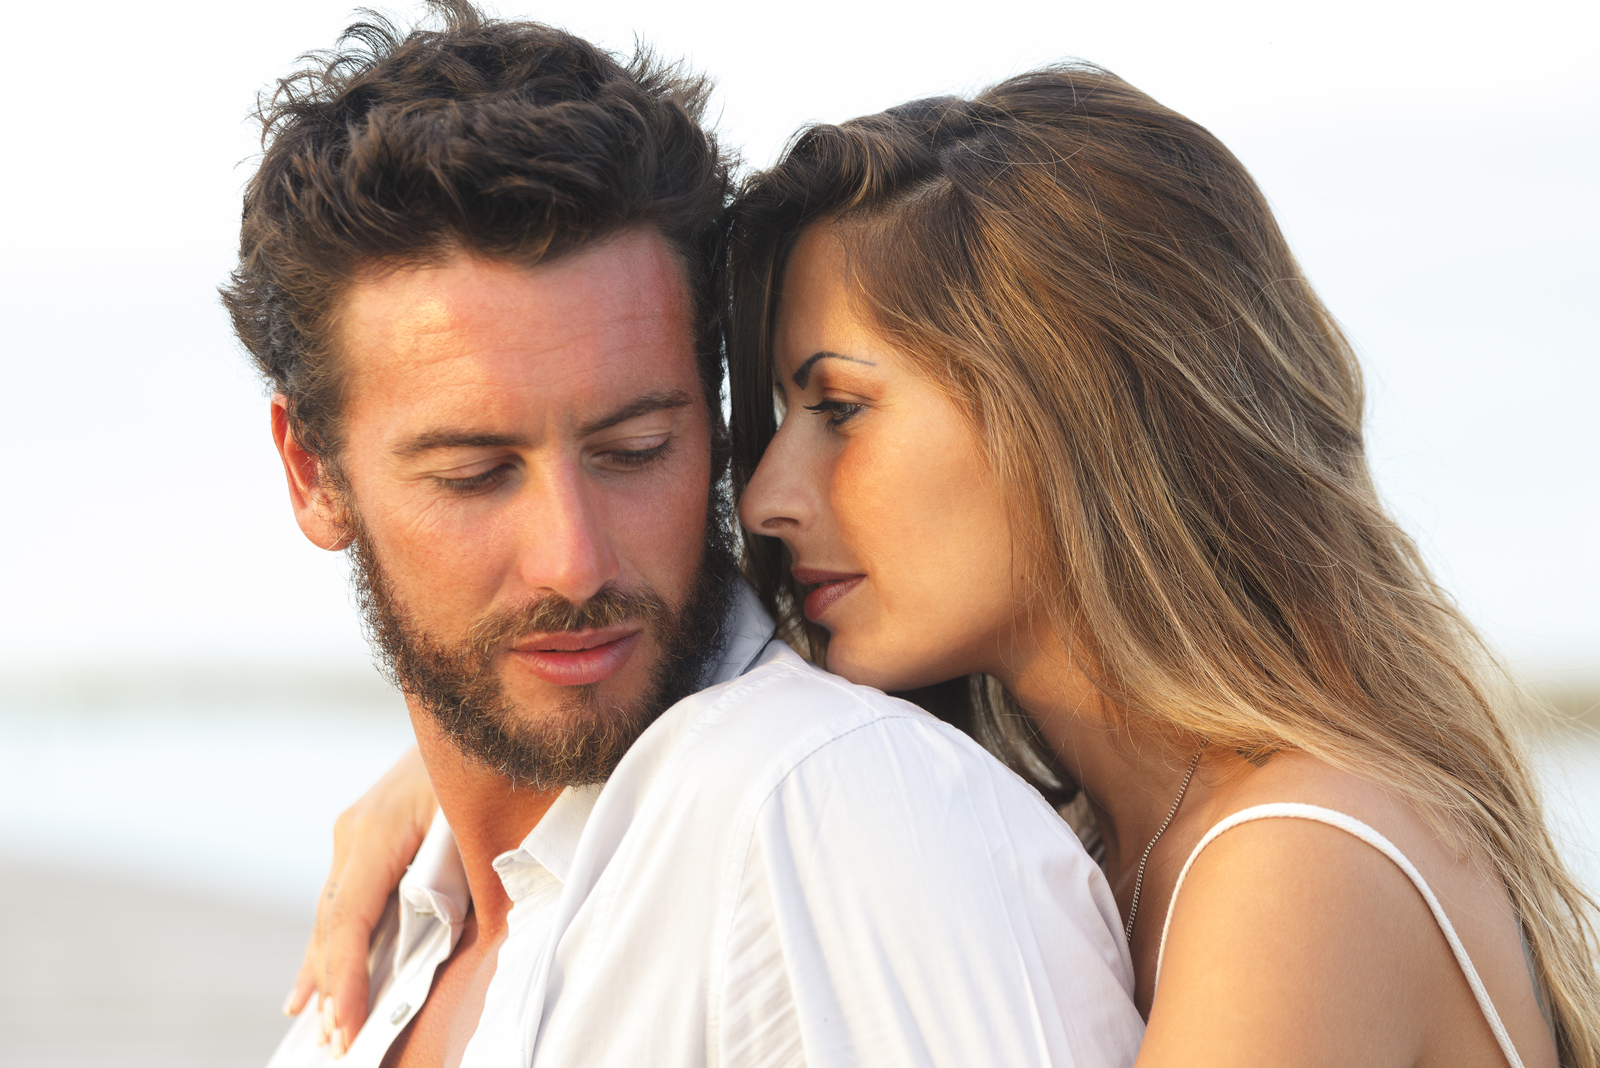 What Makes A Man Want To Protect You? 13 Surprising Reasons